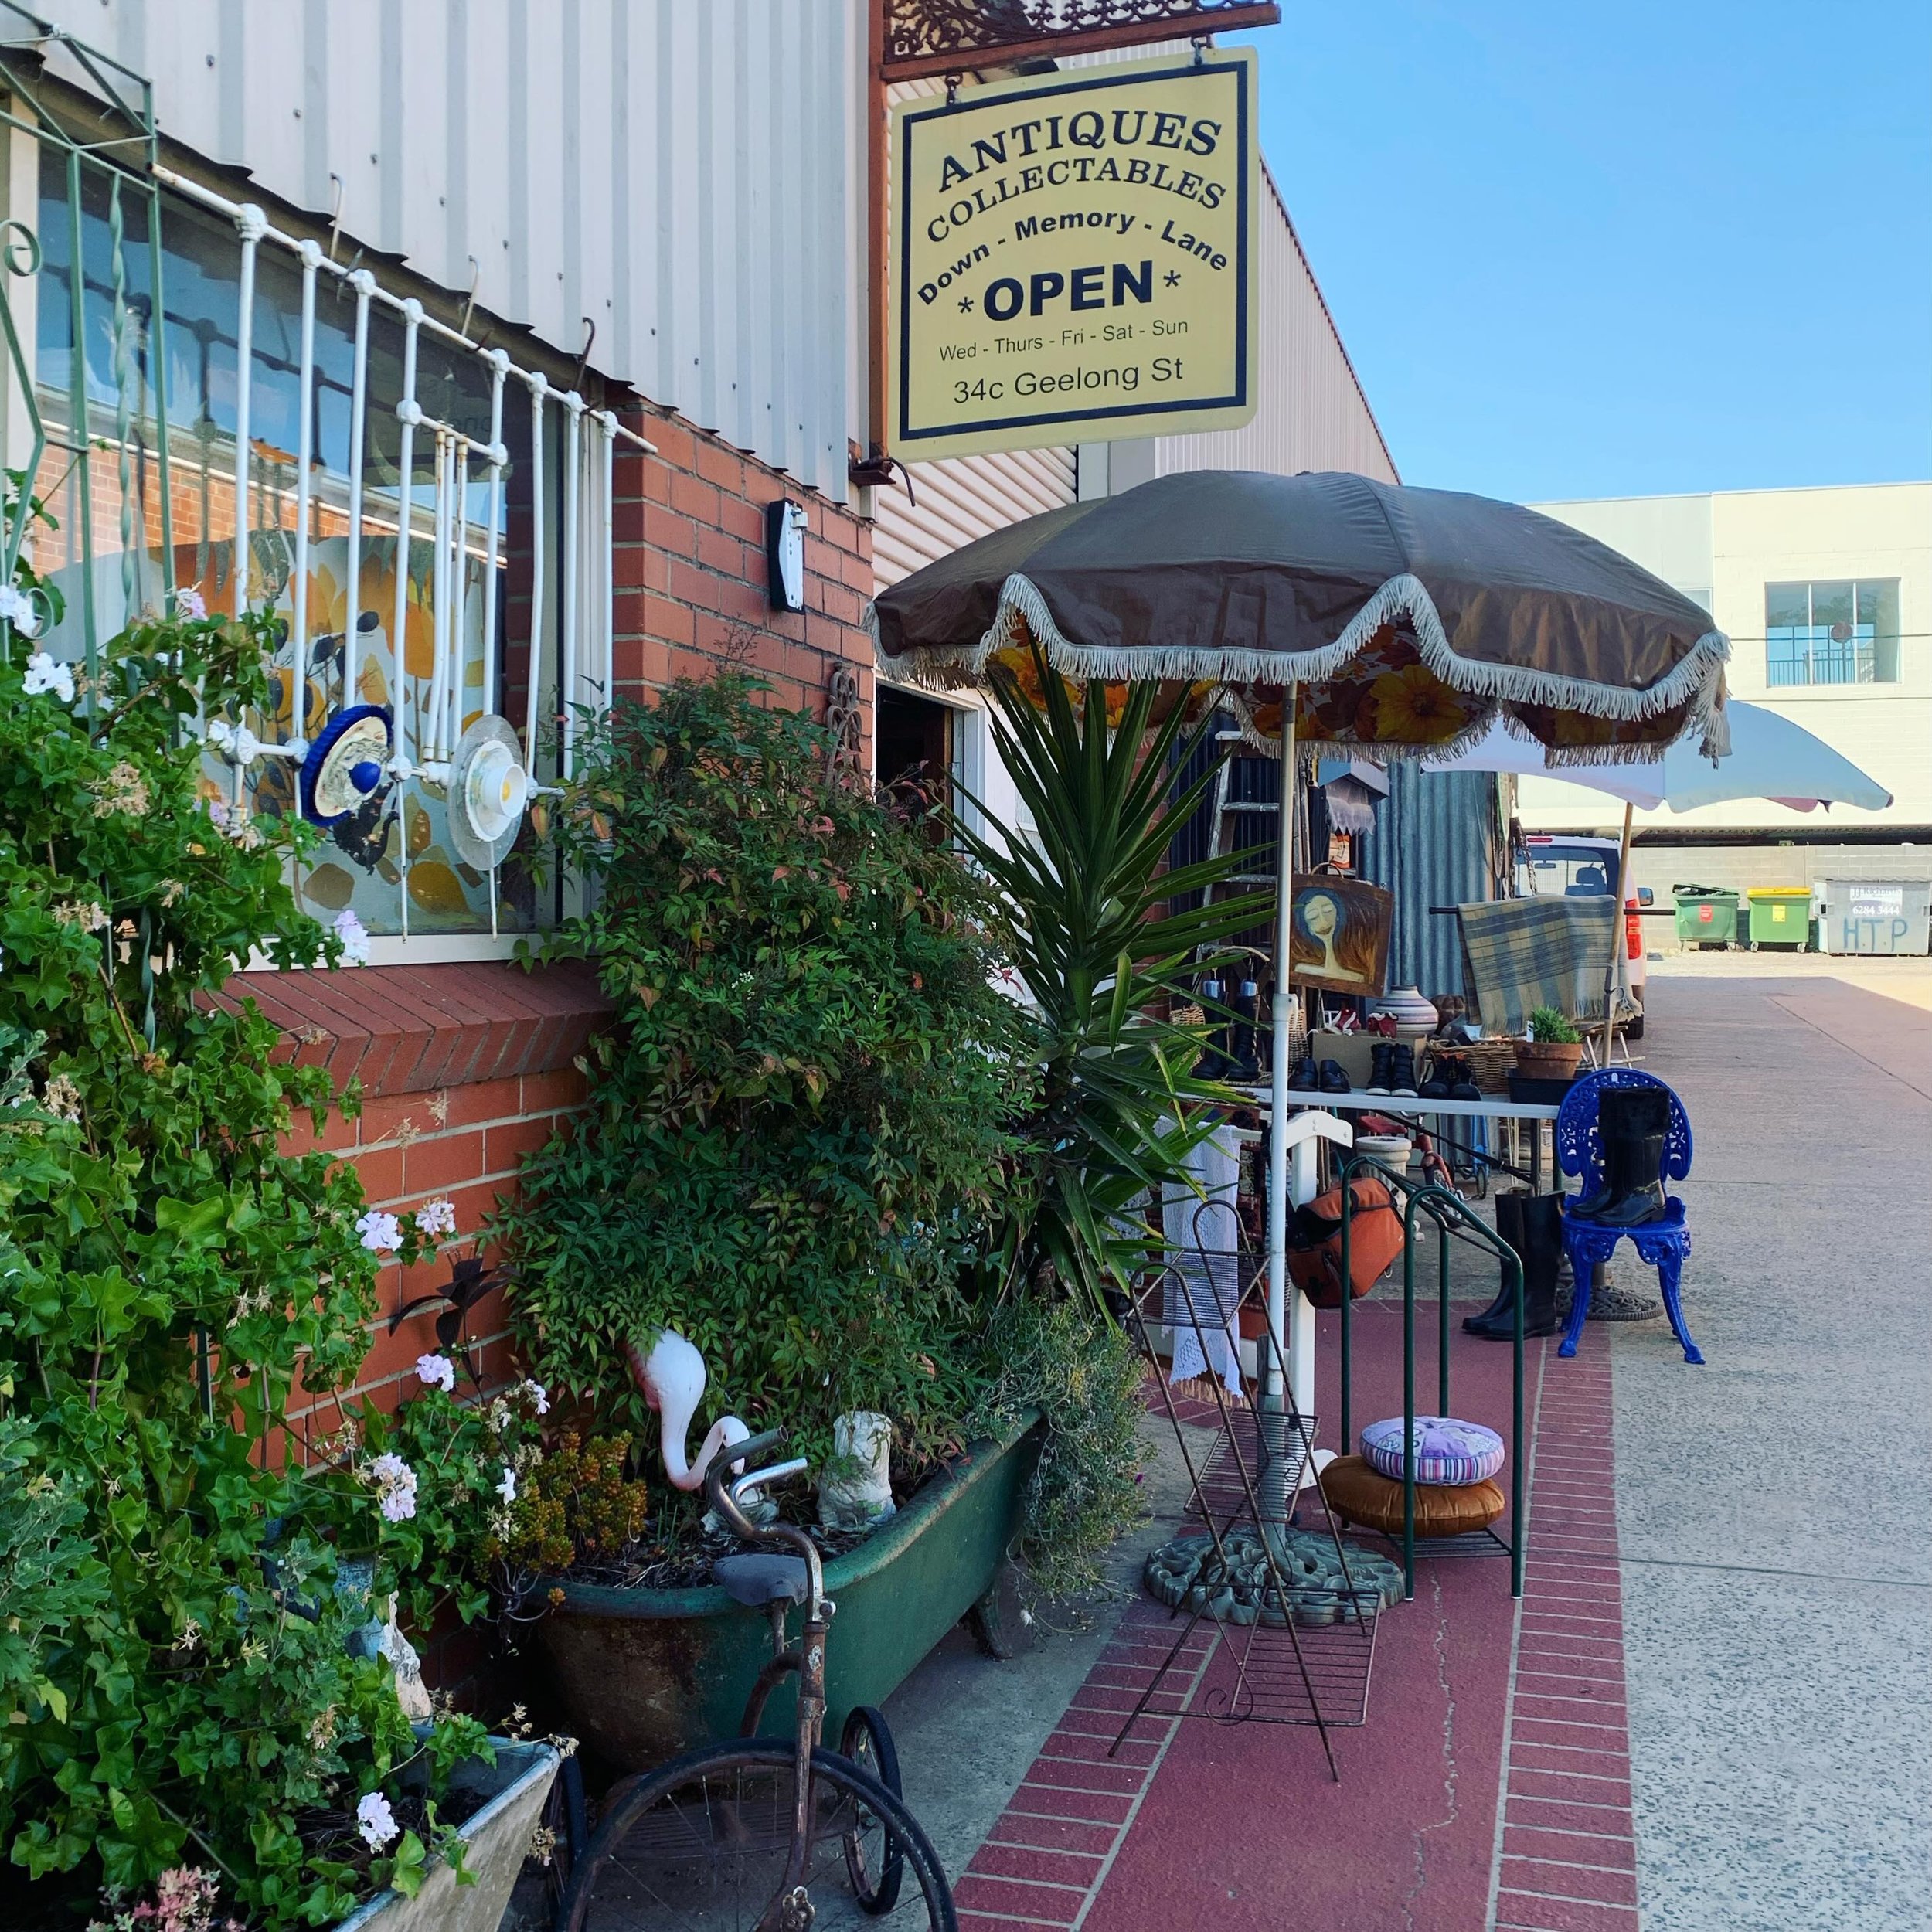 What are your plans this weekend? I&rsquo;m hoping I get to visit one of my favourite vintage shops @downmemorylanefyshwick 

#vintagestyle #canberralife #visitcanberra #vintageandretro #antiquing #1940sstyle #1940svintage